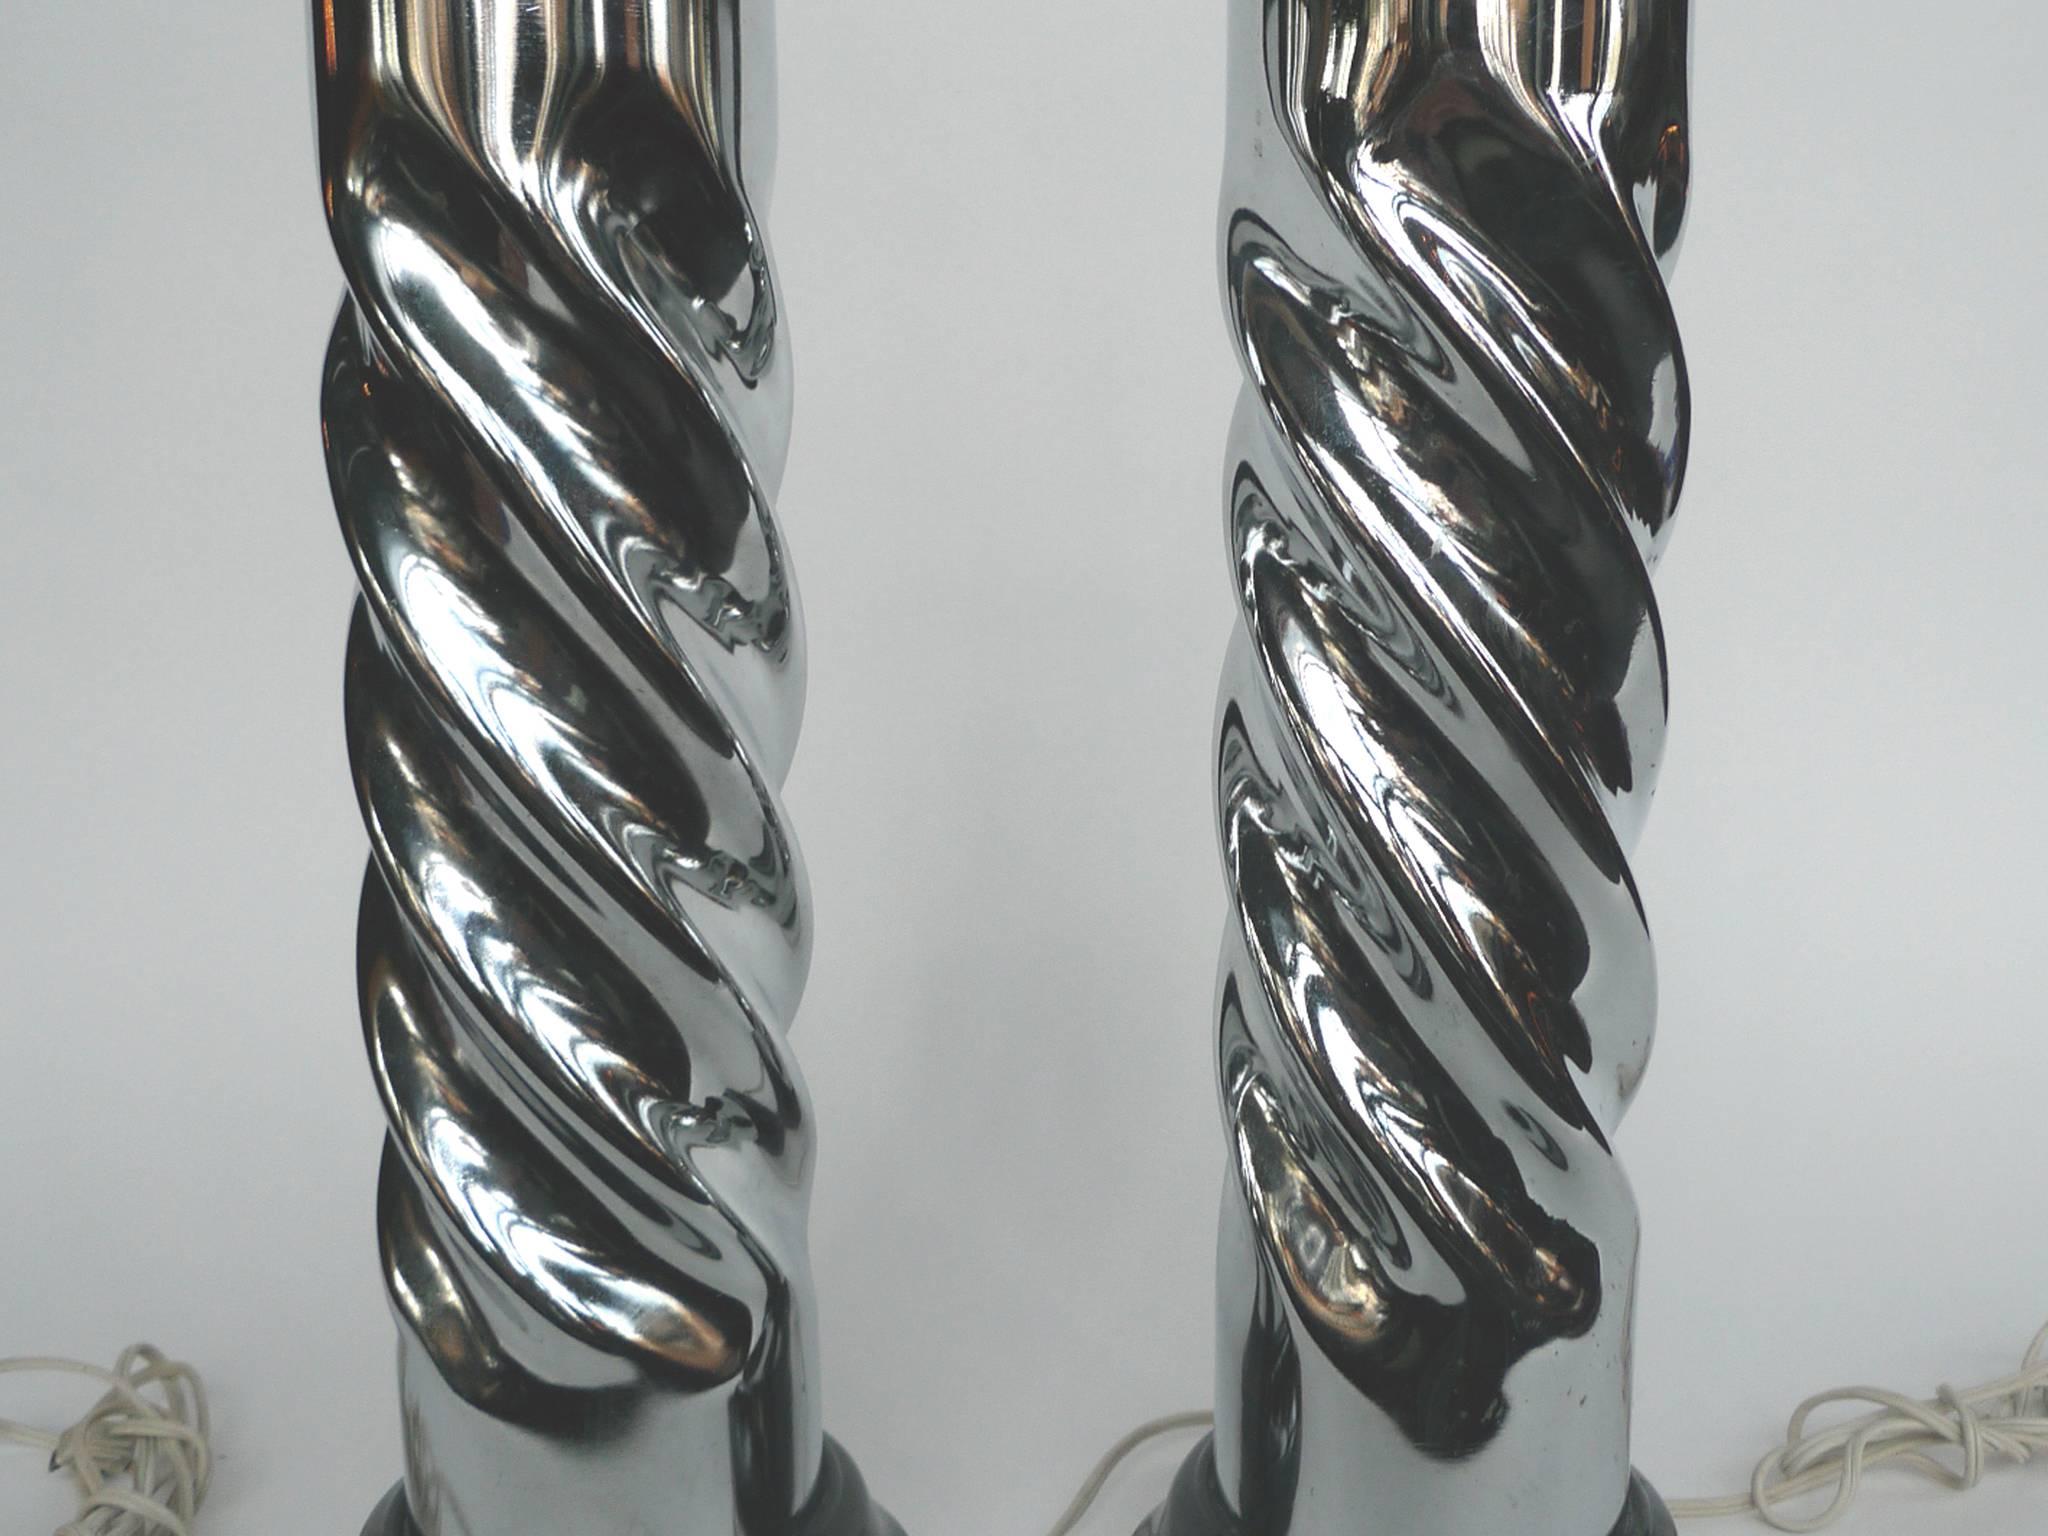 Enameled Midcentury Chrome Spiral Table Lamps, Pair